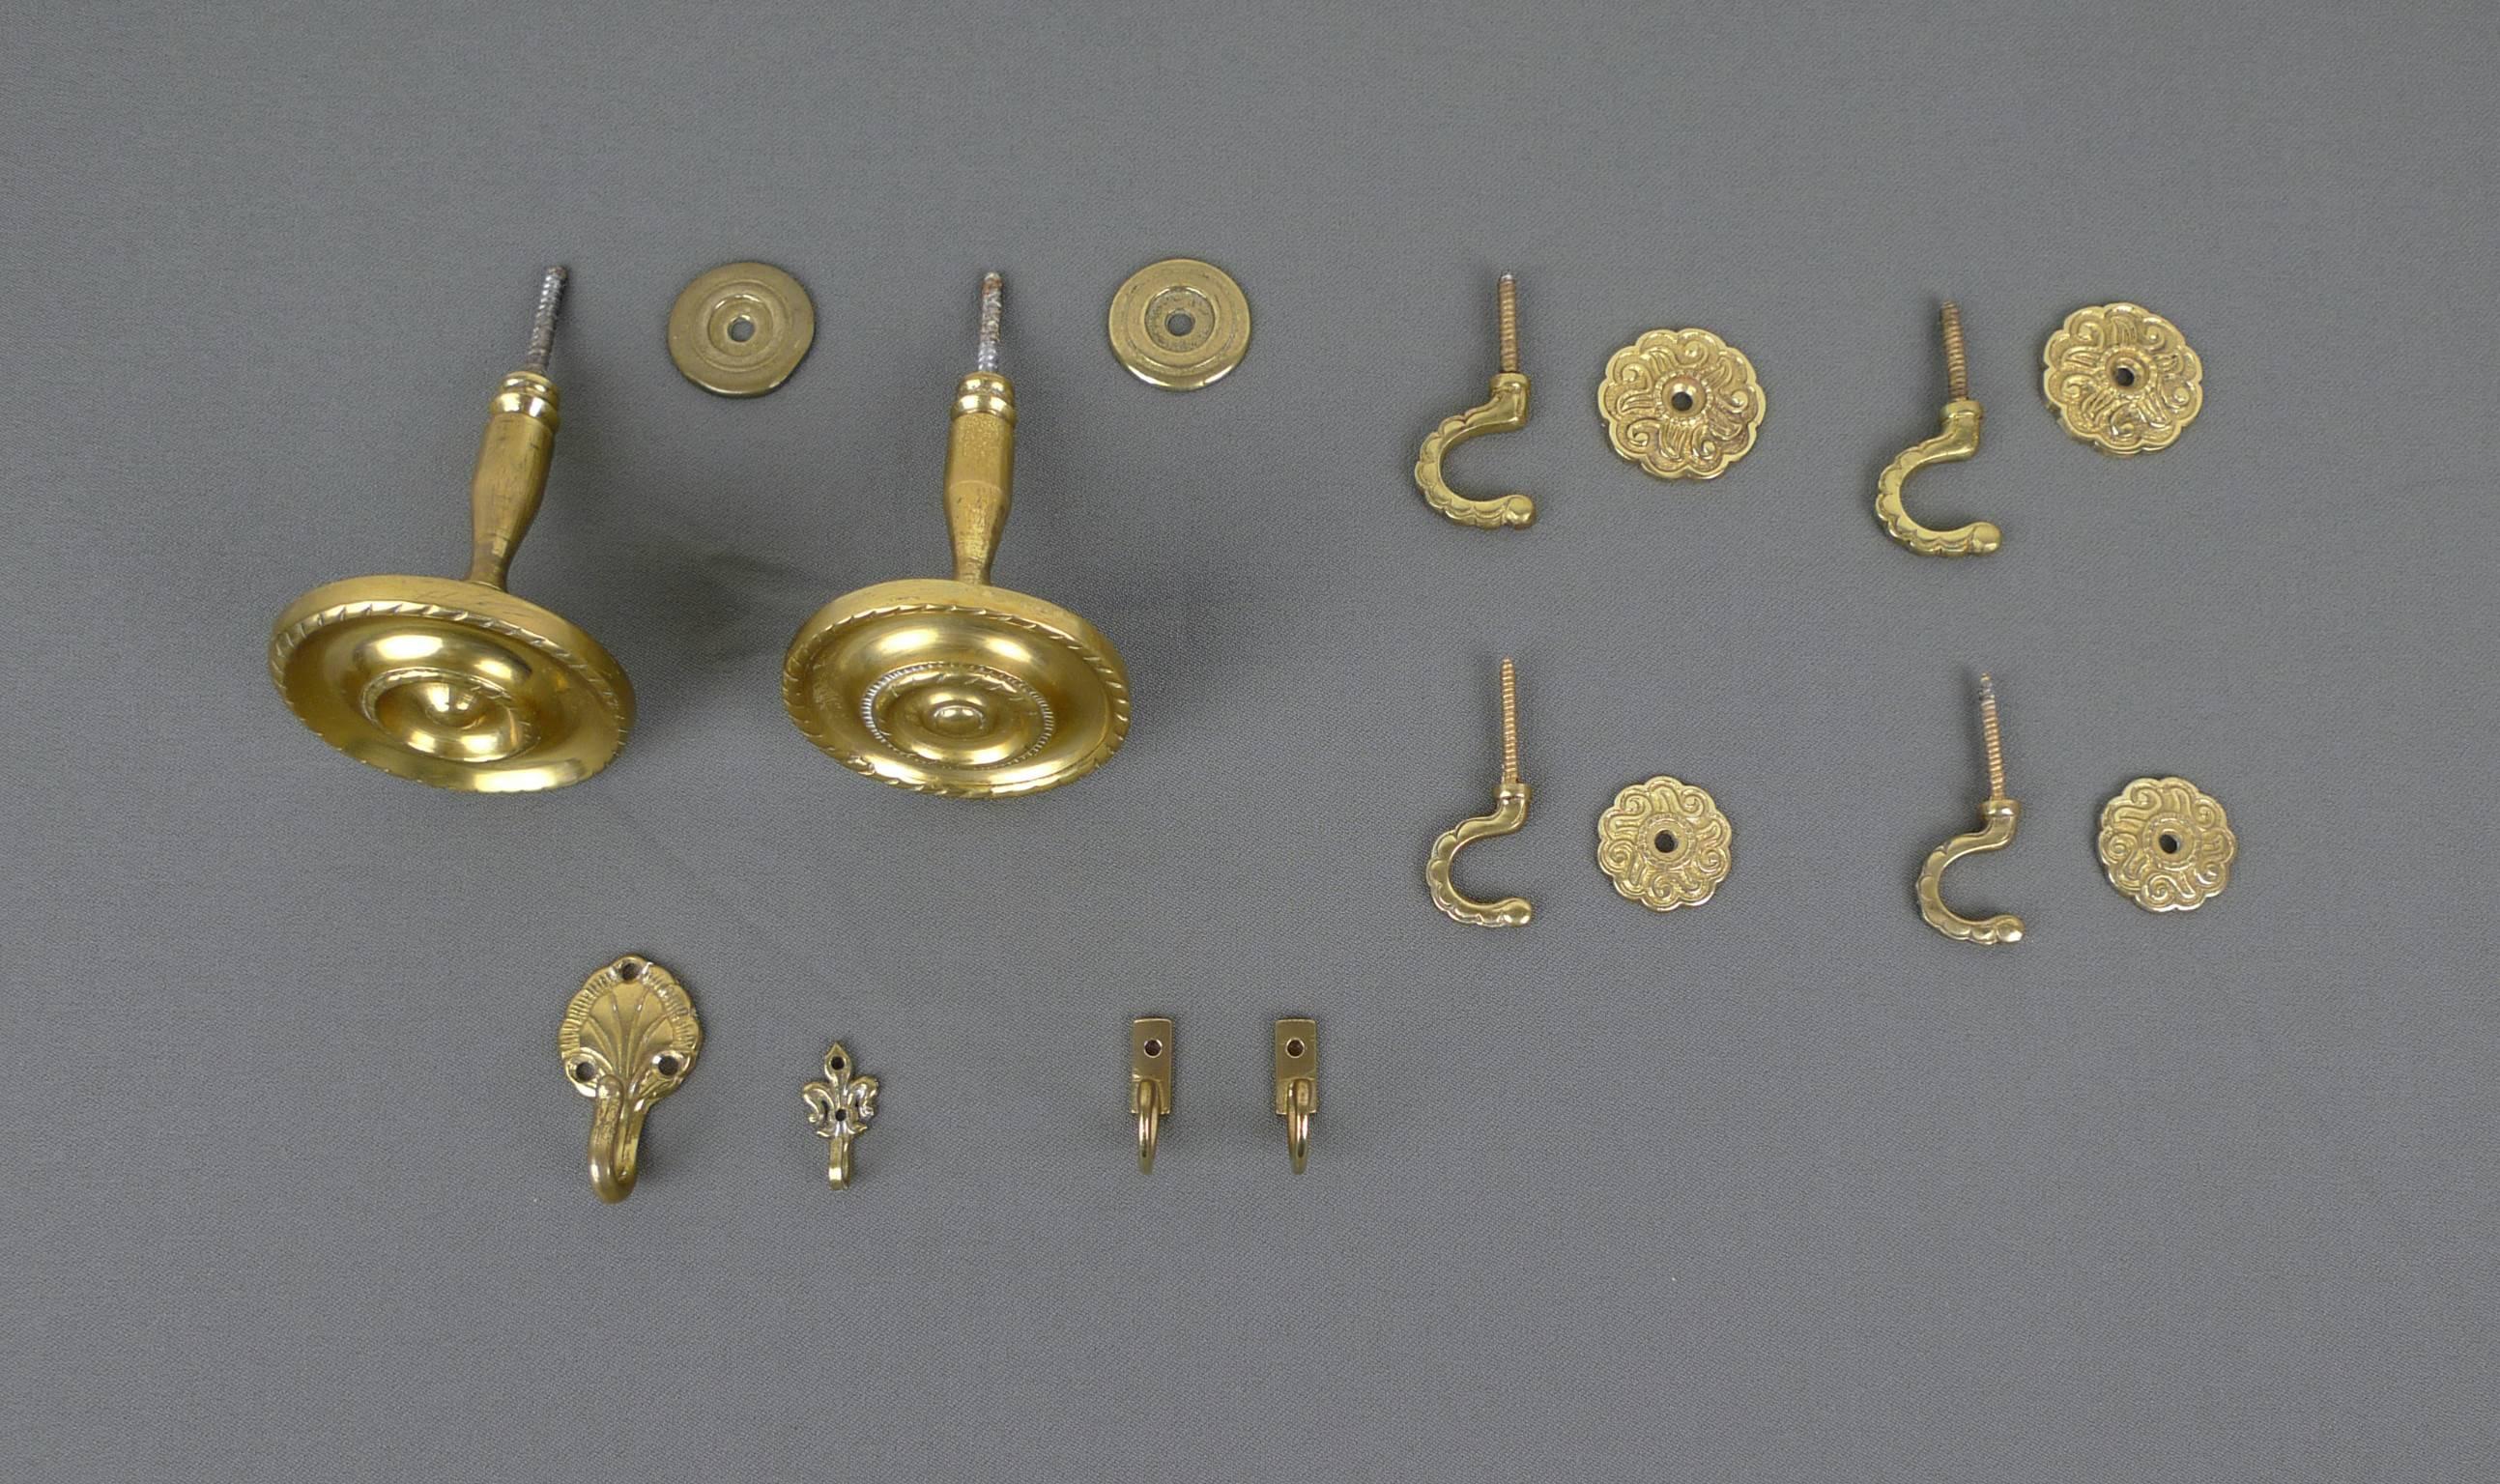 This set consists of ten different brass hooks in different sizes for wall mounting. They were produced in the 1950s in Germany.

Dimensions of the single hooks (not including threads) are:
- Two large tieback window hooks: 7,5 cm diameter x 9 cm